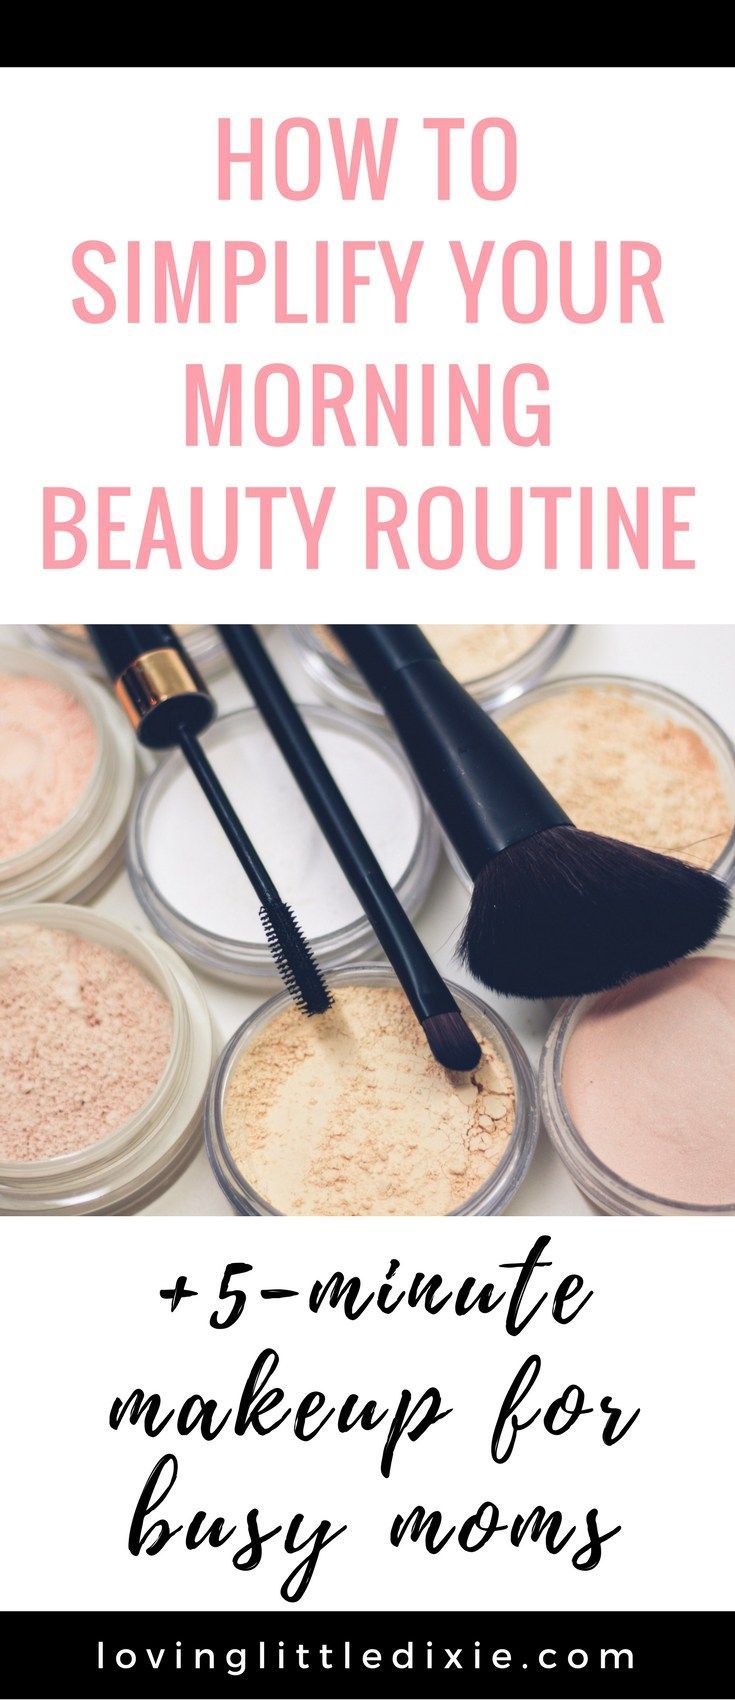 How to Simplify Your Morning Beauty Routine | Fruitful Home Co. - How to Simplify Your Morning Beauty Routine | Fruitful Home Co. -   18 morning beauty Tips ideas